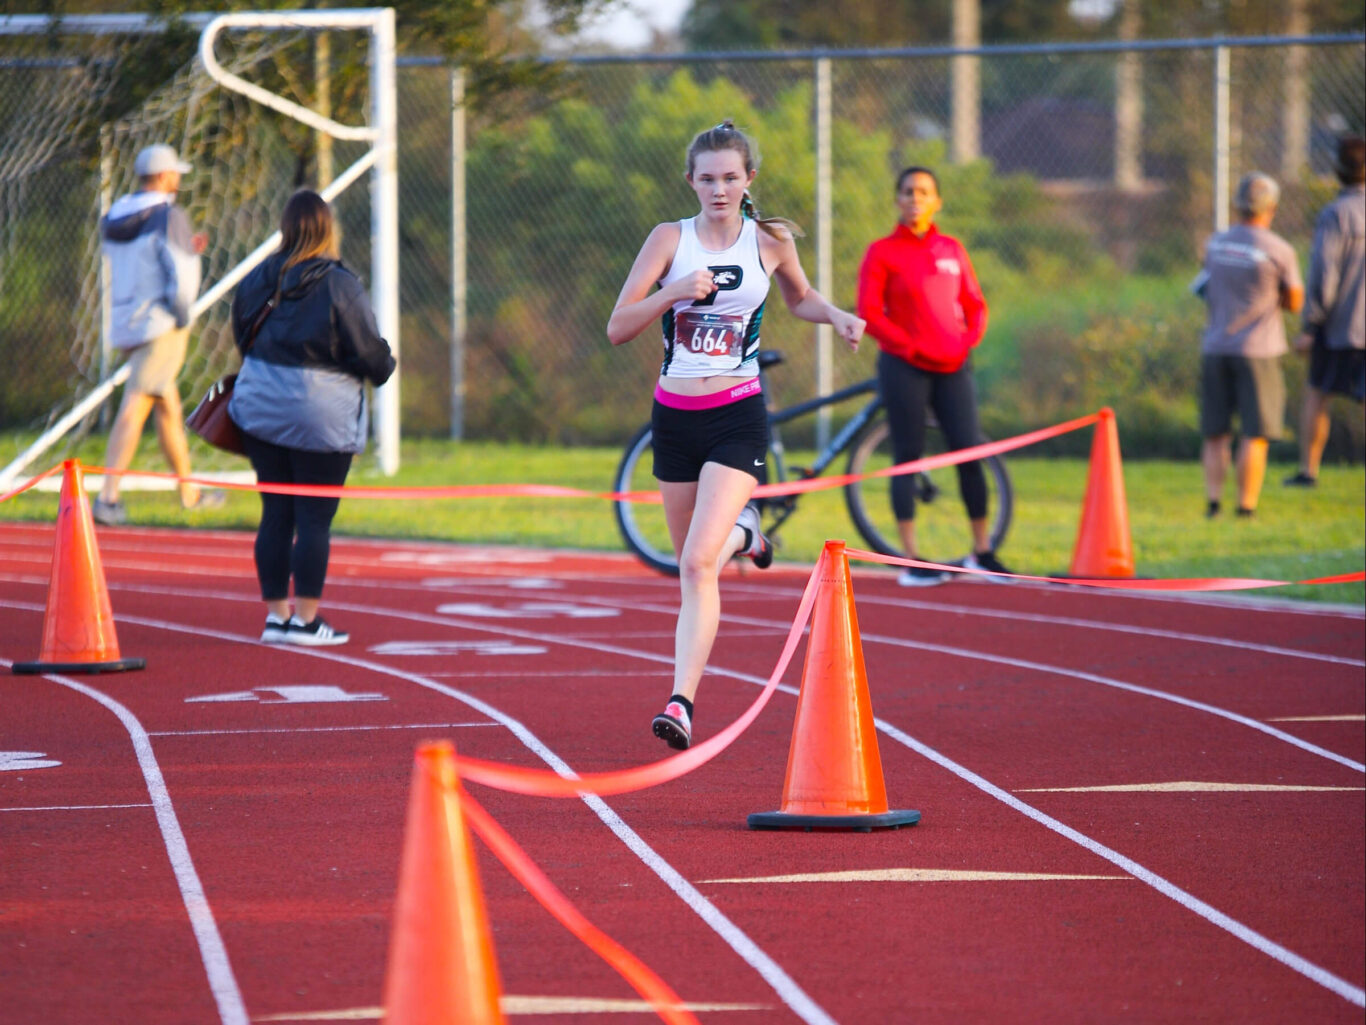 A Cross Country athlete is running on a track in front of orange cones.